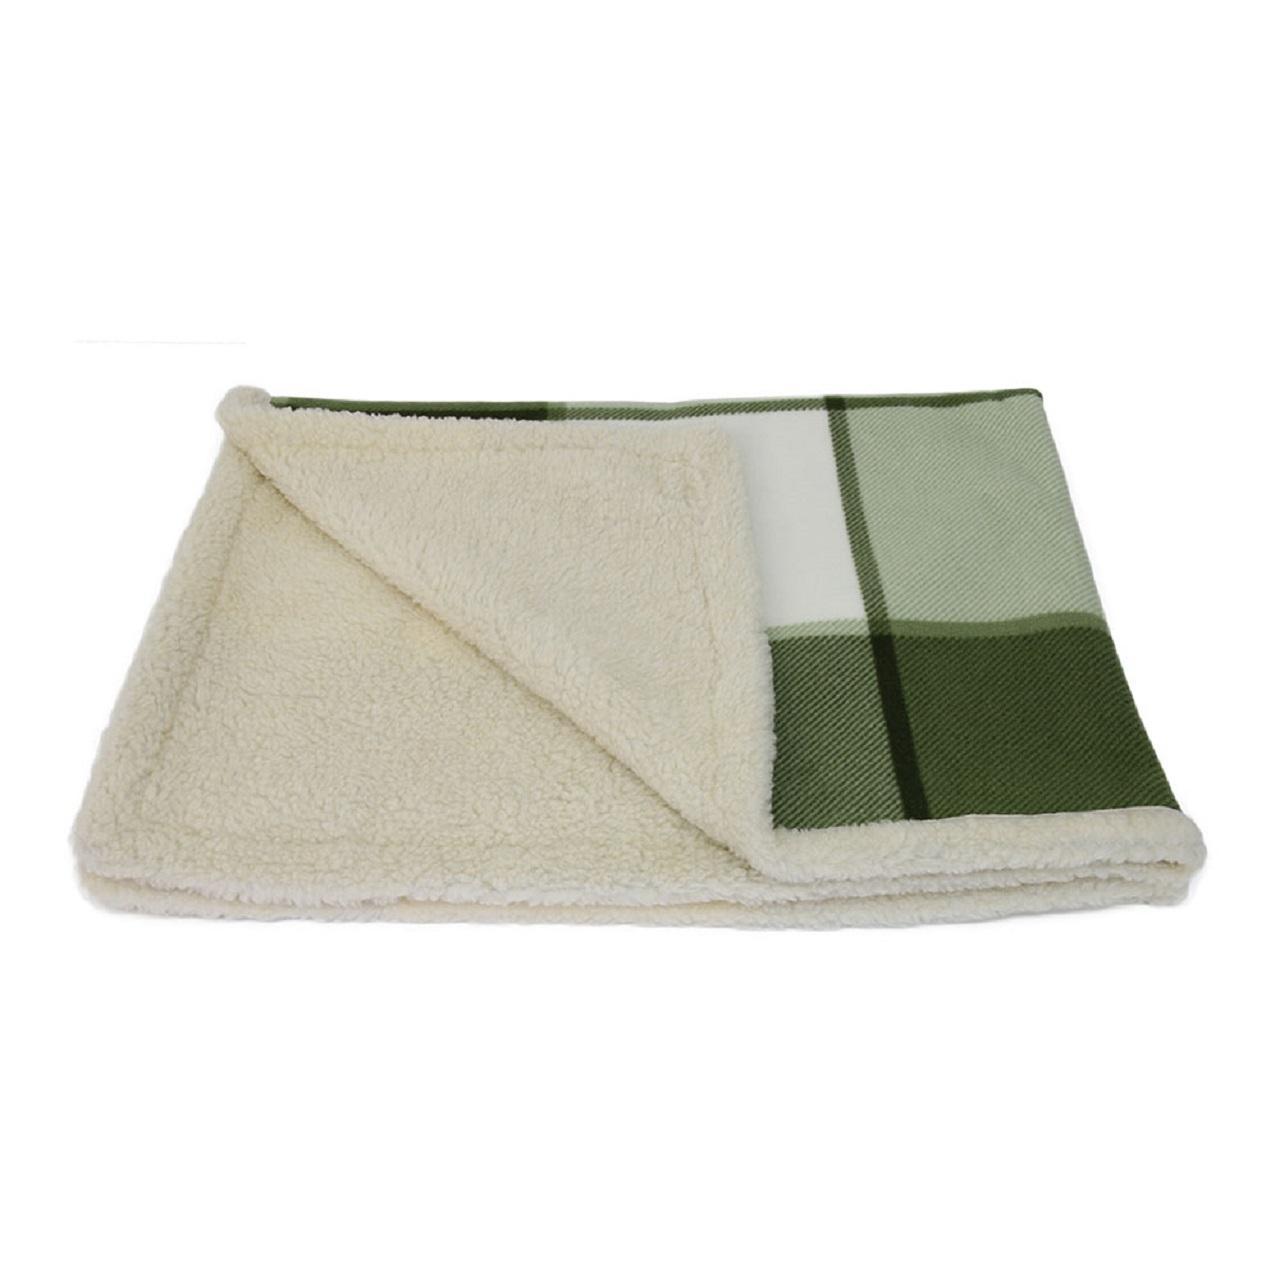 An image of Earthbound Sherpa Pet Blanket Green Check Extra Large